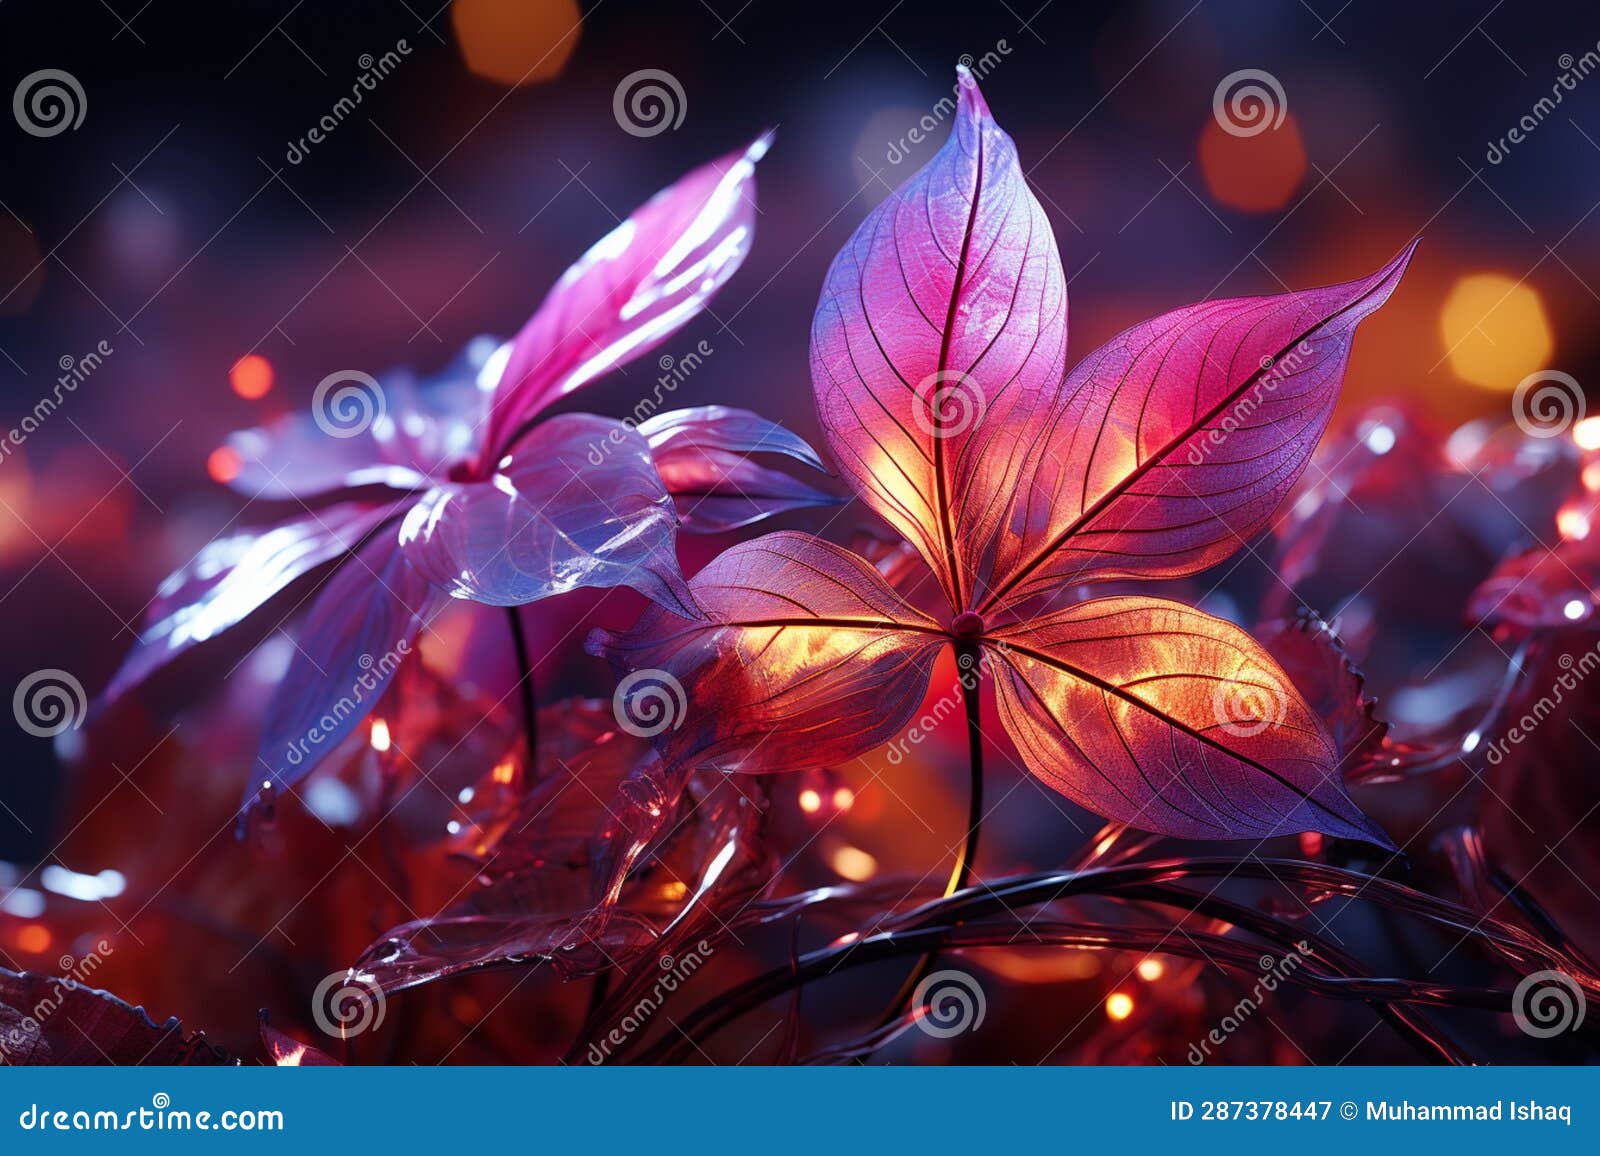 ethereal glow, neon lights encase leaves, forming a luminous and enchanting backdrop